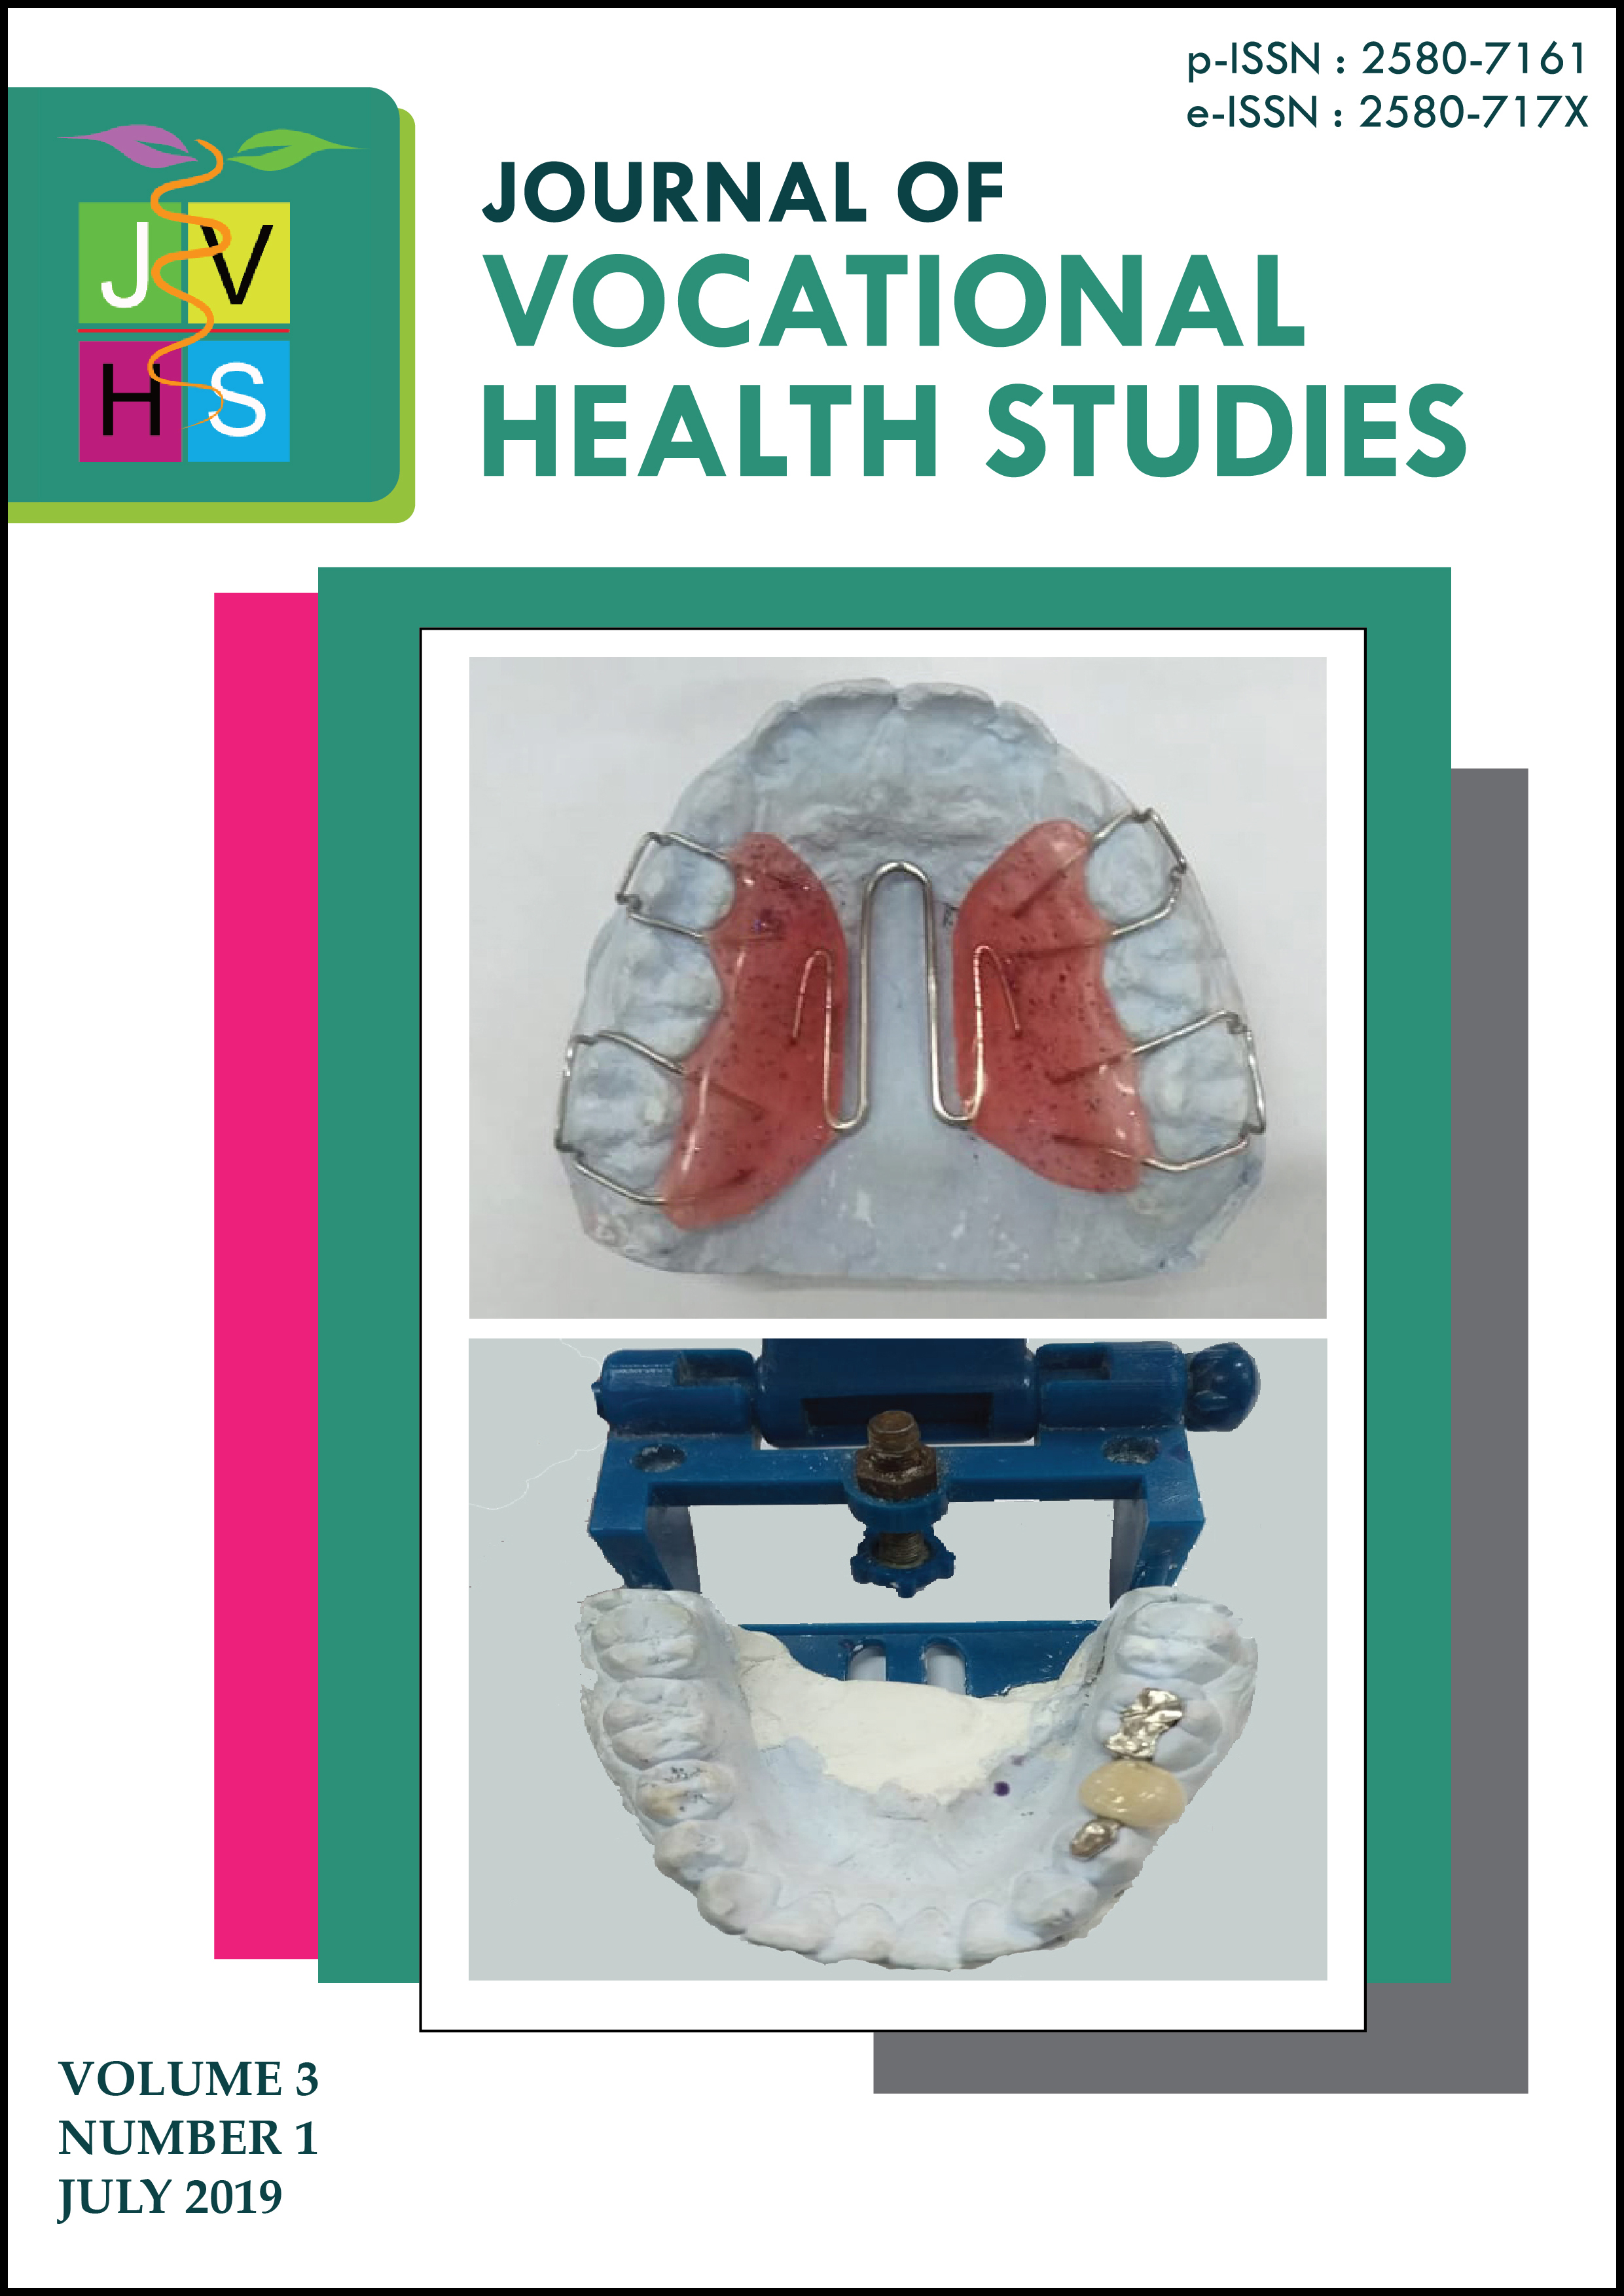 						View Vol. 3 No. 1 (2019): July 2019 | JOURNAL OF VOCATIONAL HEALTH STUDIES
					